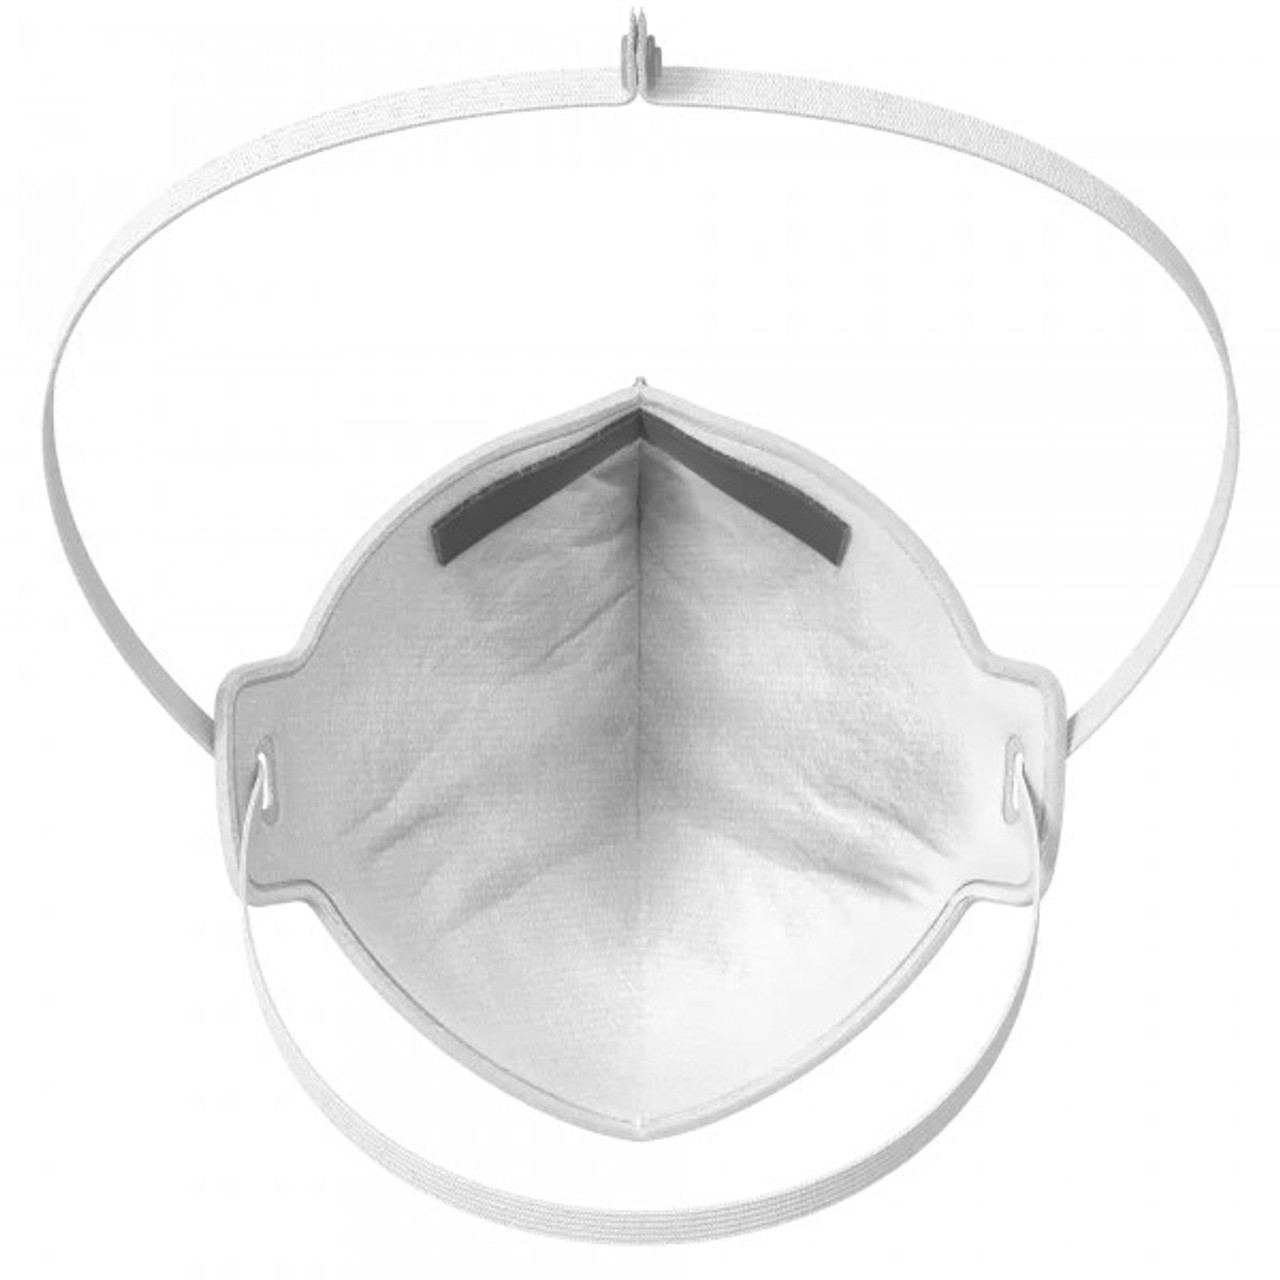 Back of the Drager X-plore 1730 FFP3 Unvalved Respirator Mask